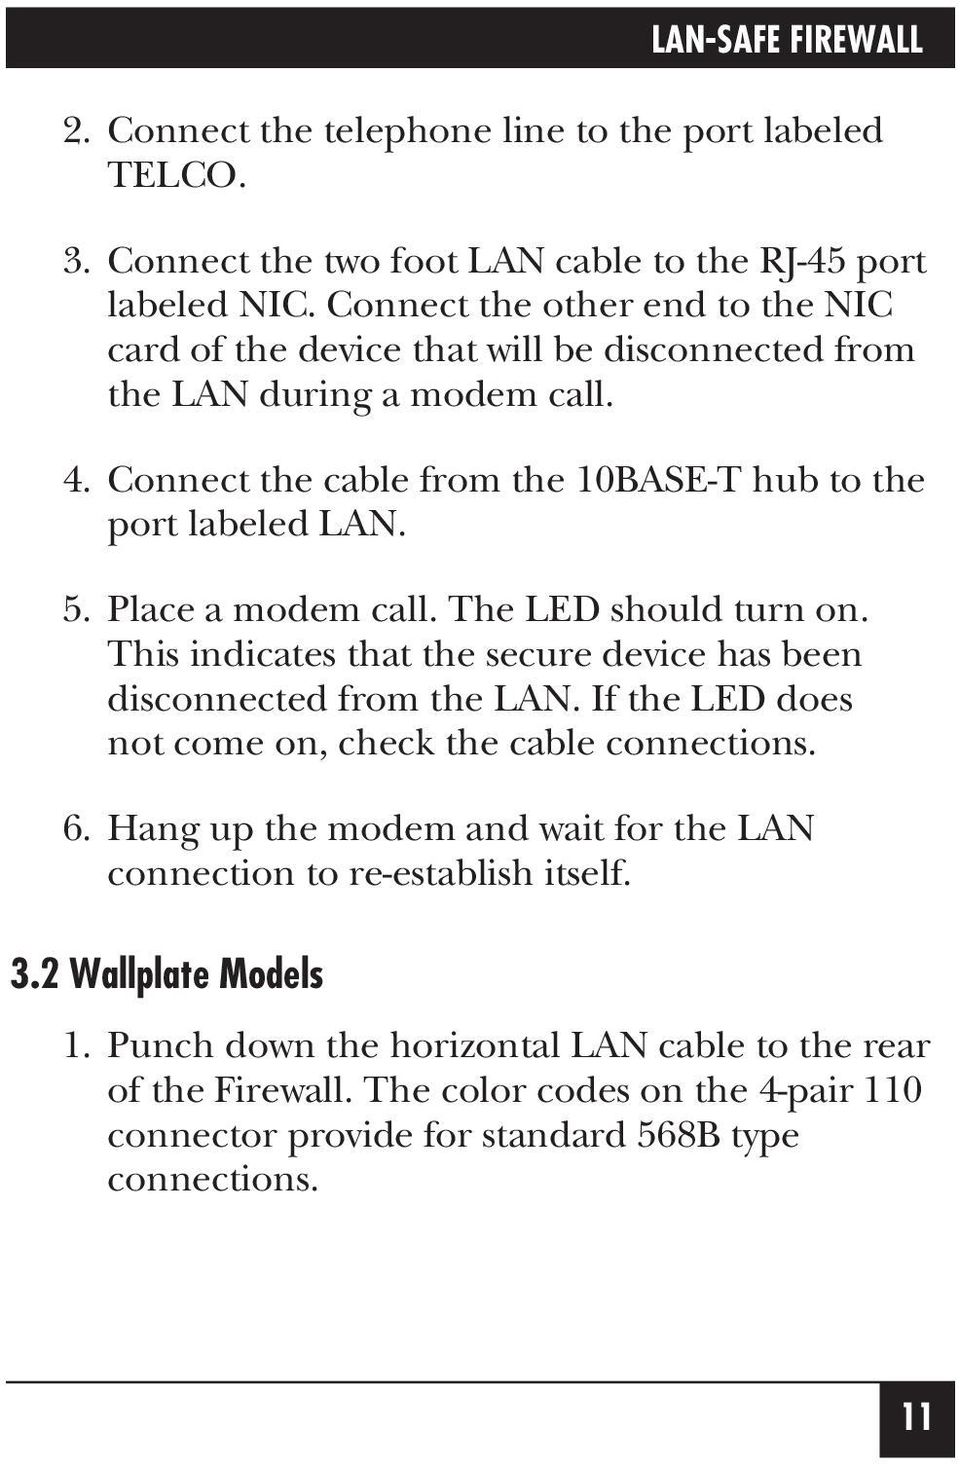 Place a modem call. The LED should turn on. This indicates that the secure device has been disconnected from the LAN. If the LED does not come on, check the cable connections. 6.